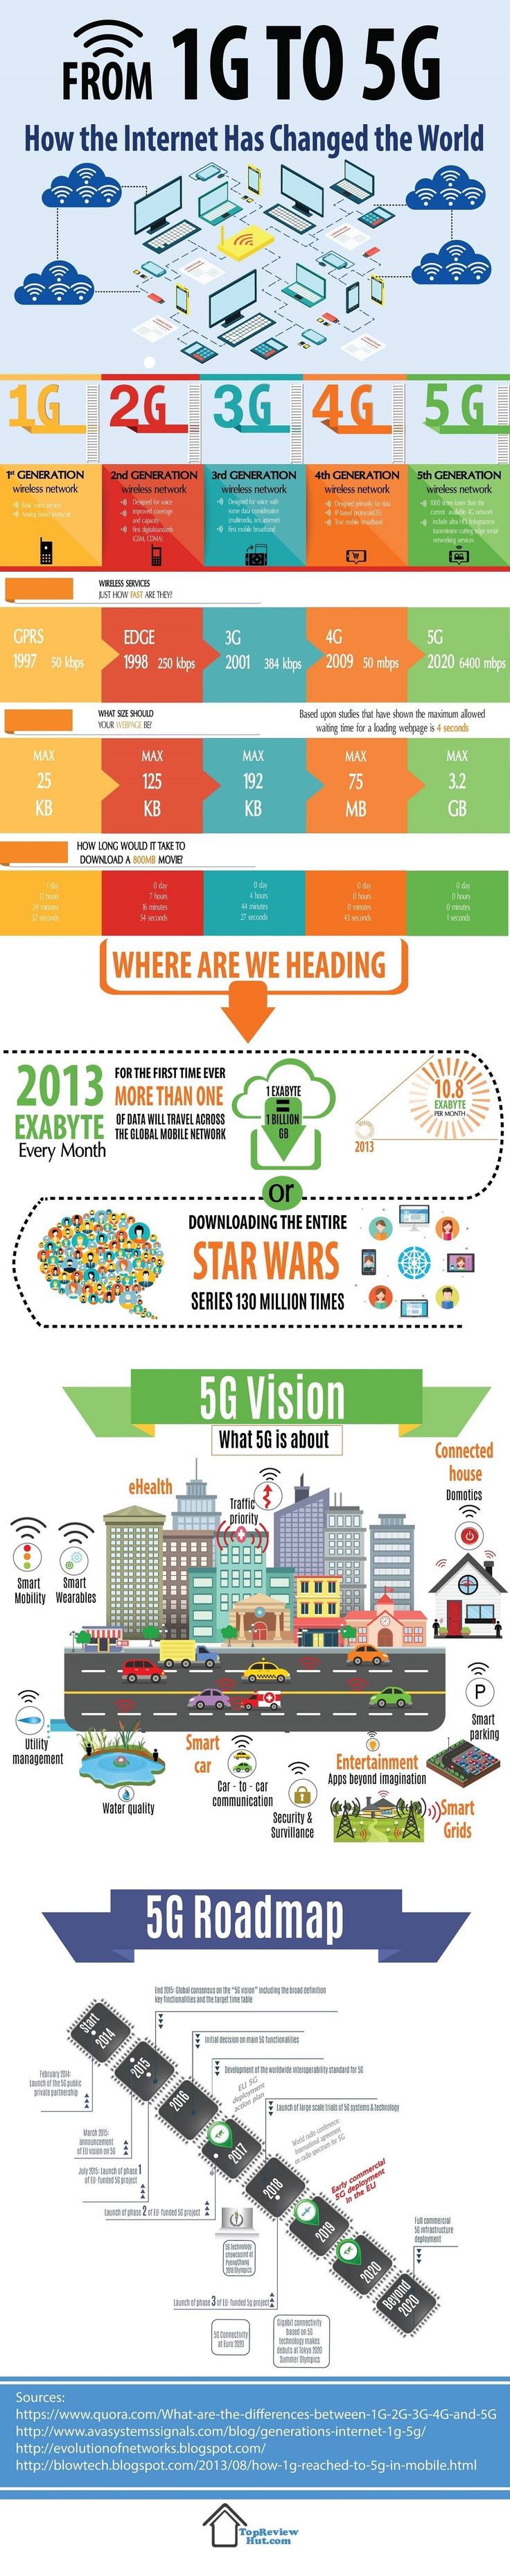 How the Internet Has Changed the World #Infographic #Internet #Technology